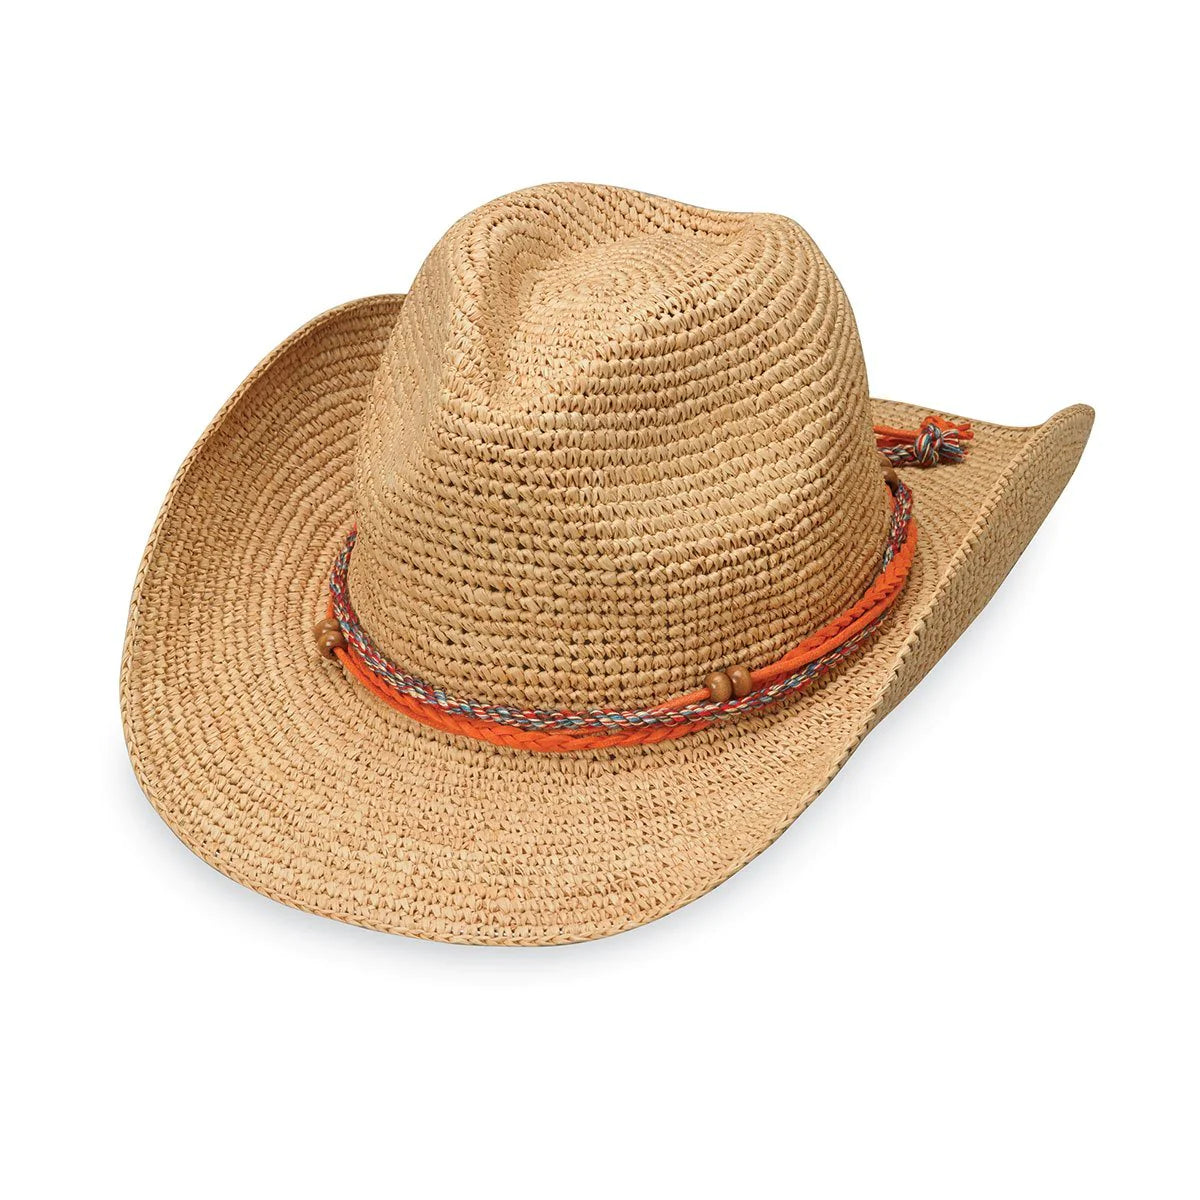 Whether exploring the Southwest or lounging at the beach, this artsy cowboy sun hat will be your new summer favourite. The wire-edged brim makes it easily moldable to your exact style. A faux suede leather and colourful beaded band makes it interesting.